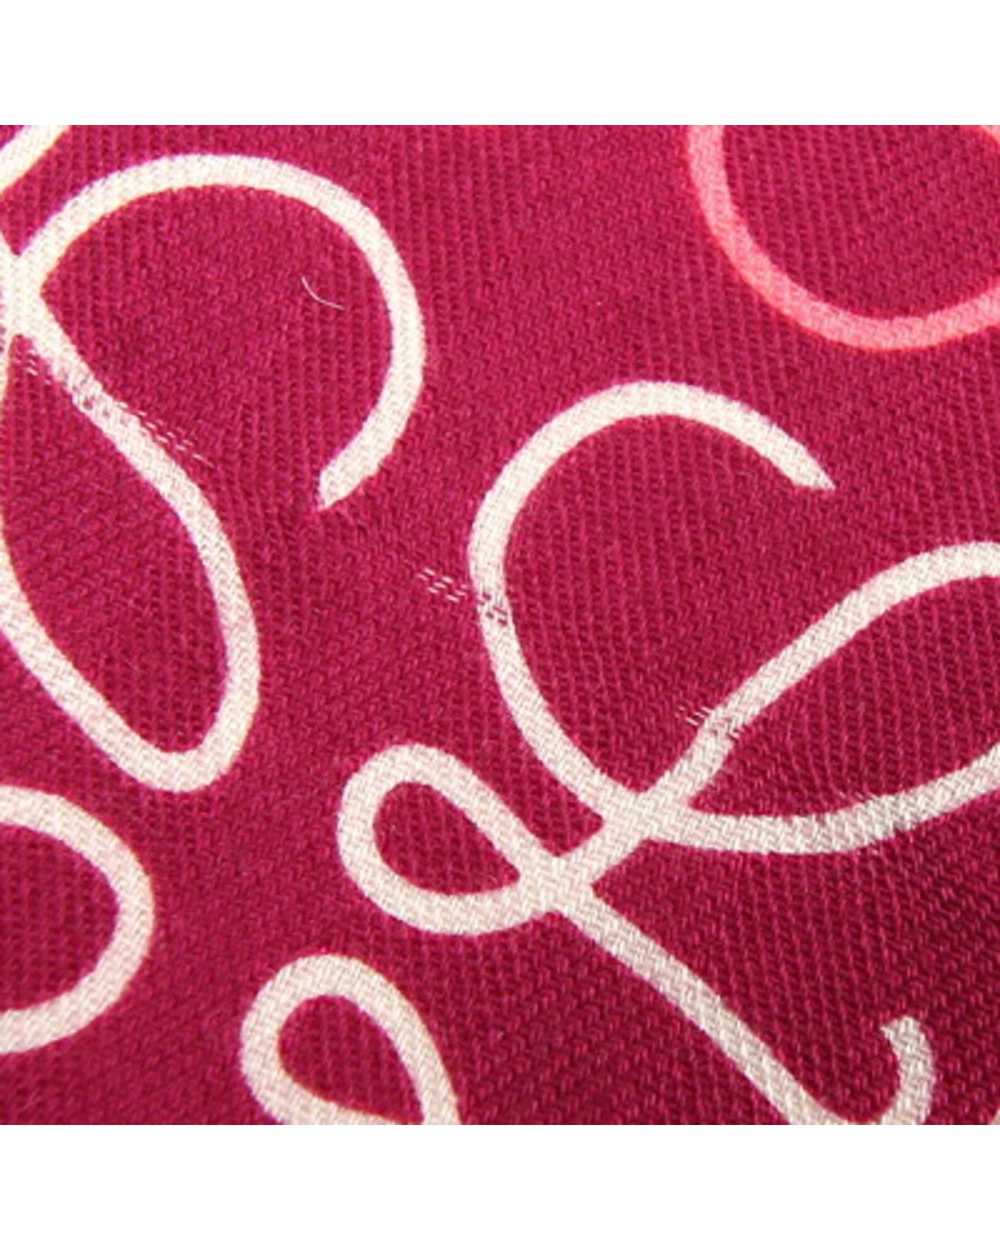 Loewe Wool-Silk-Cashmere Pink Scarf for Women by … - image 5